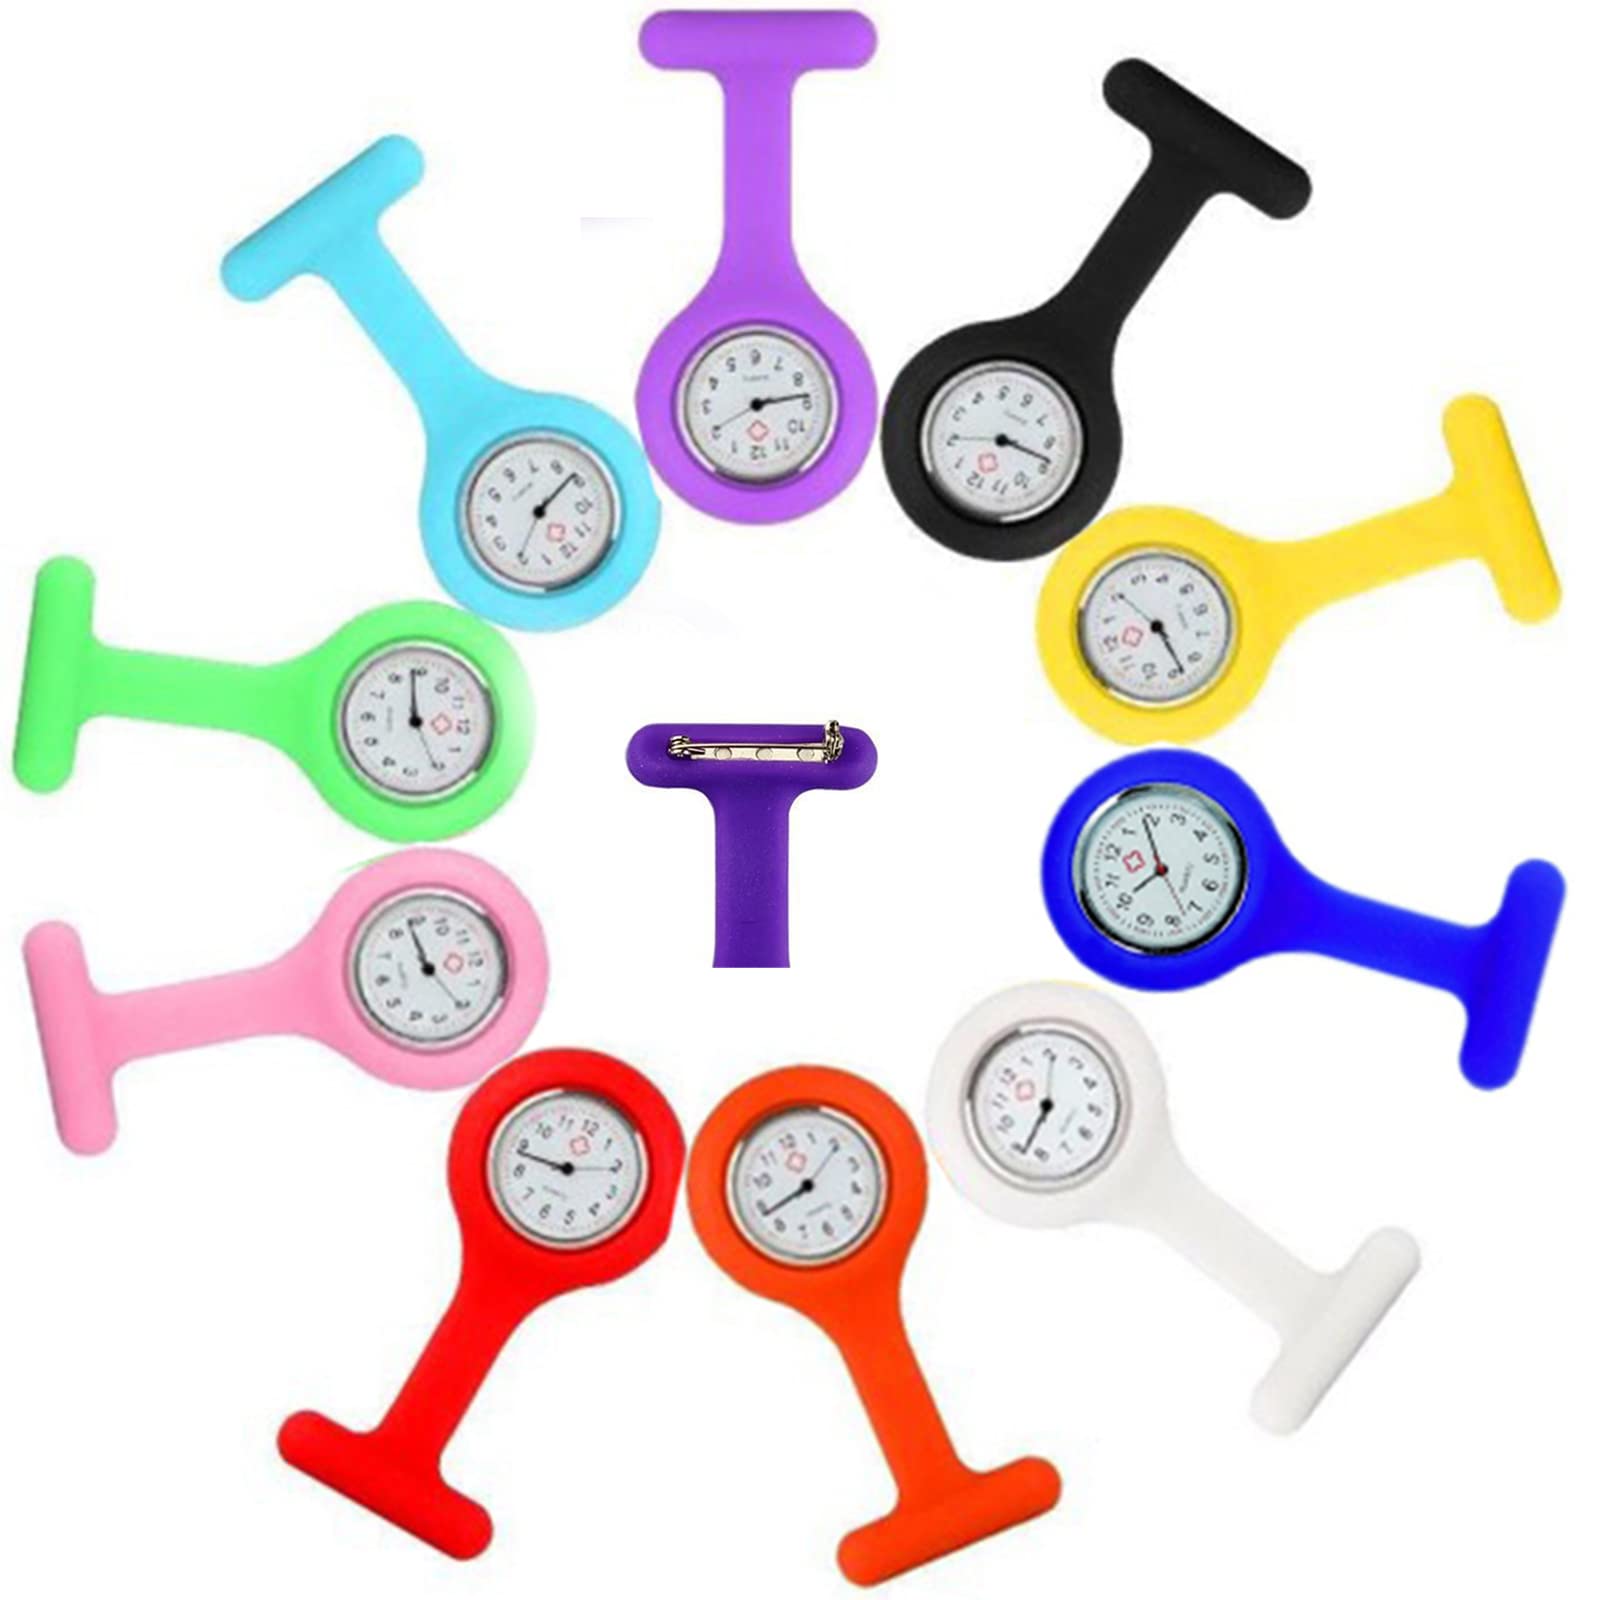 Fashionwu 10 Pcs Silicone Nurse Watches with Clip, Fob Watches for Nurses Portable Nurse Watch Brooch for Women Men, Unisex Portable Silicone Quartz Watches